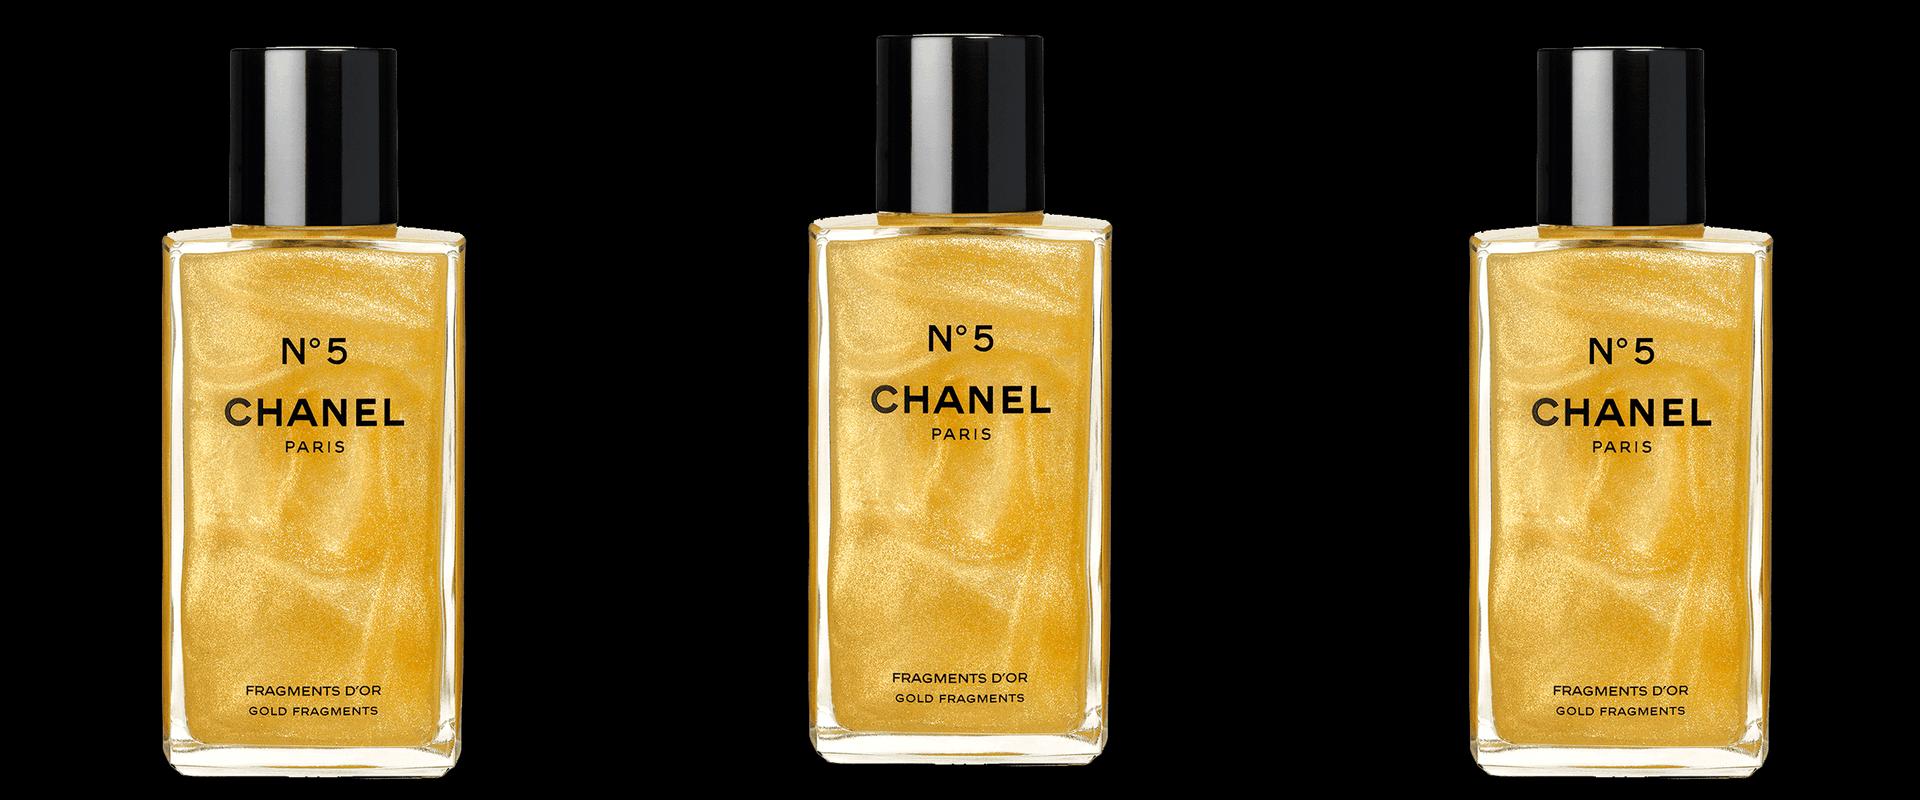 Chanel has a new golden body gel named N°5 Fragments D'or